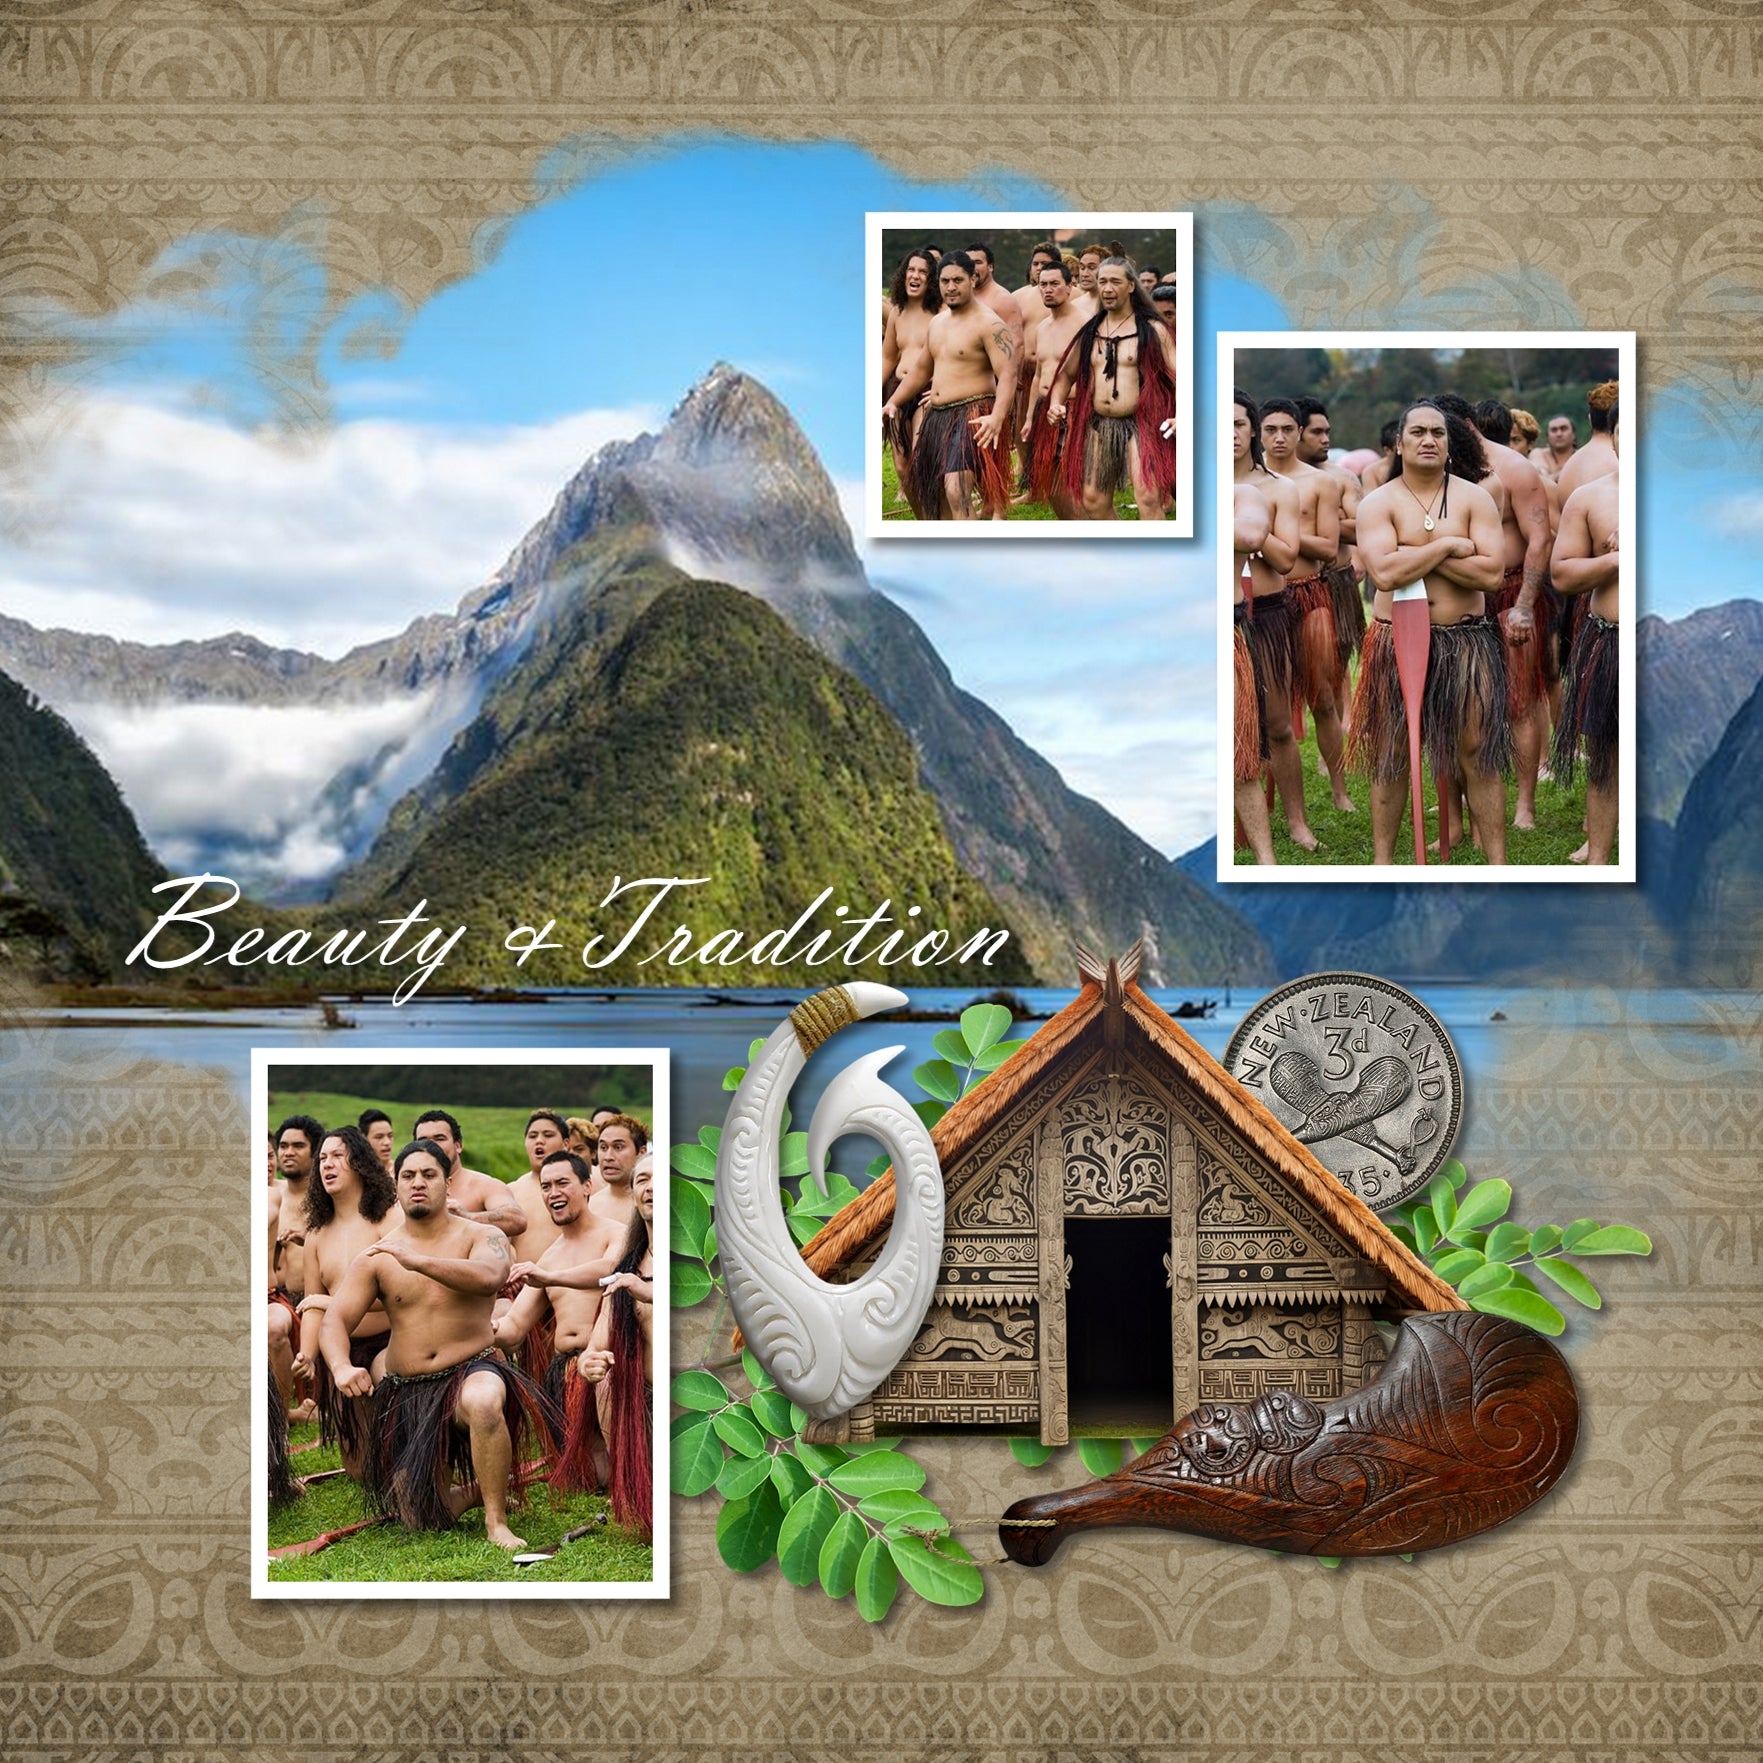 Highlight your vacation memories with these realistic digital art embellishments, grunge papers, patterned overlays, and Maori tattoos by Lucky Girl Creative. Great for digital scrapbooking holidays to New Zealand and Australia and exploring native and indigenous life throughout Polynesia! Embellishments include tram, incline train, coat of arms, coin, Maori flag, flags, territory, helicopter, kiwi fruit, Hobbit door, glacier, lighthouse, folk art, wood carving, Maori house hut, and more.